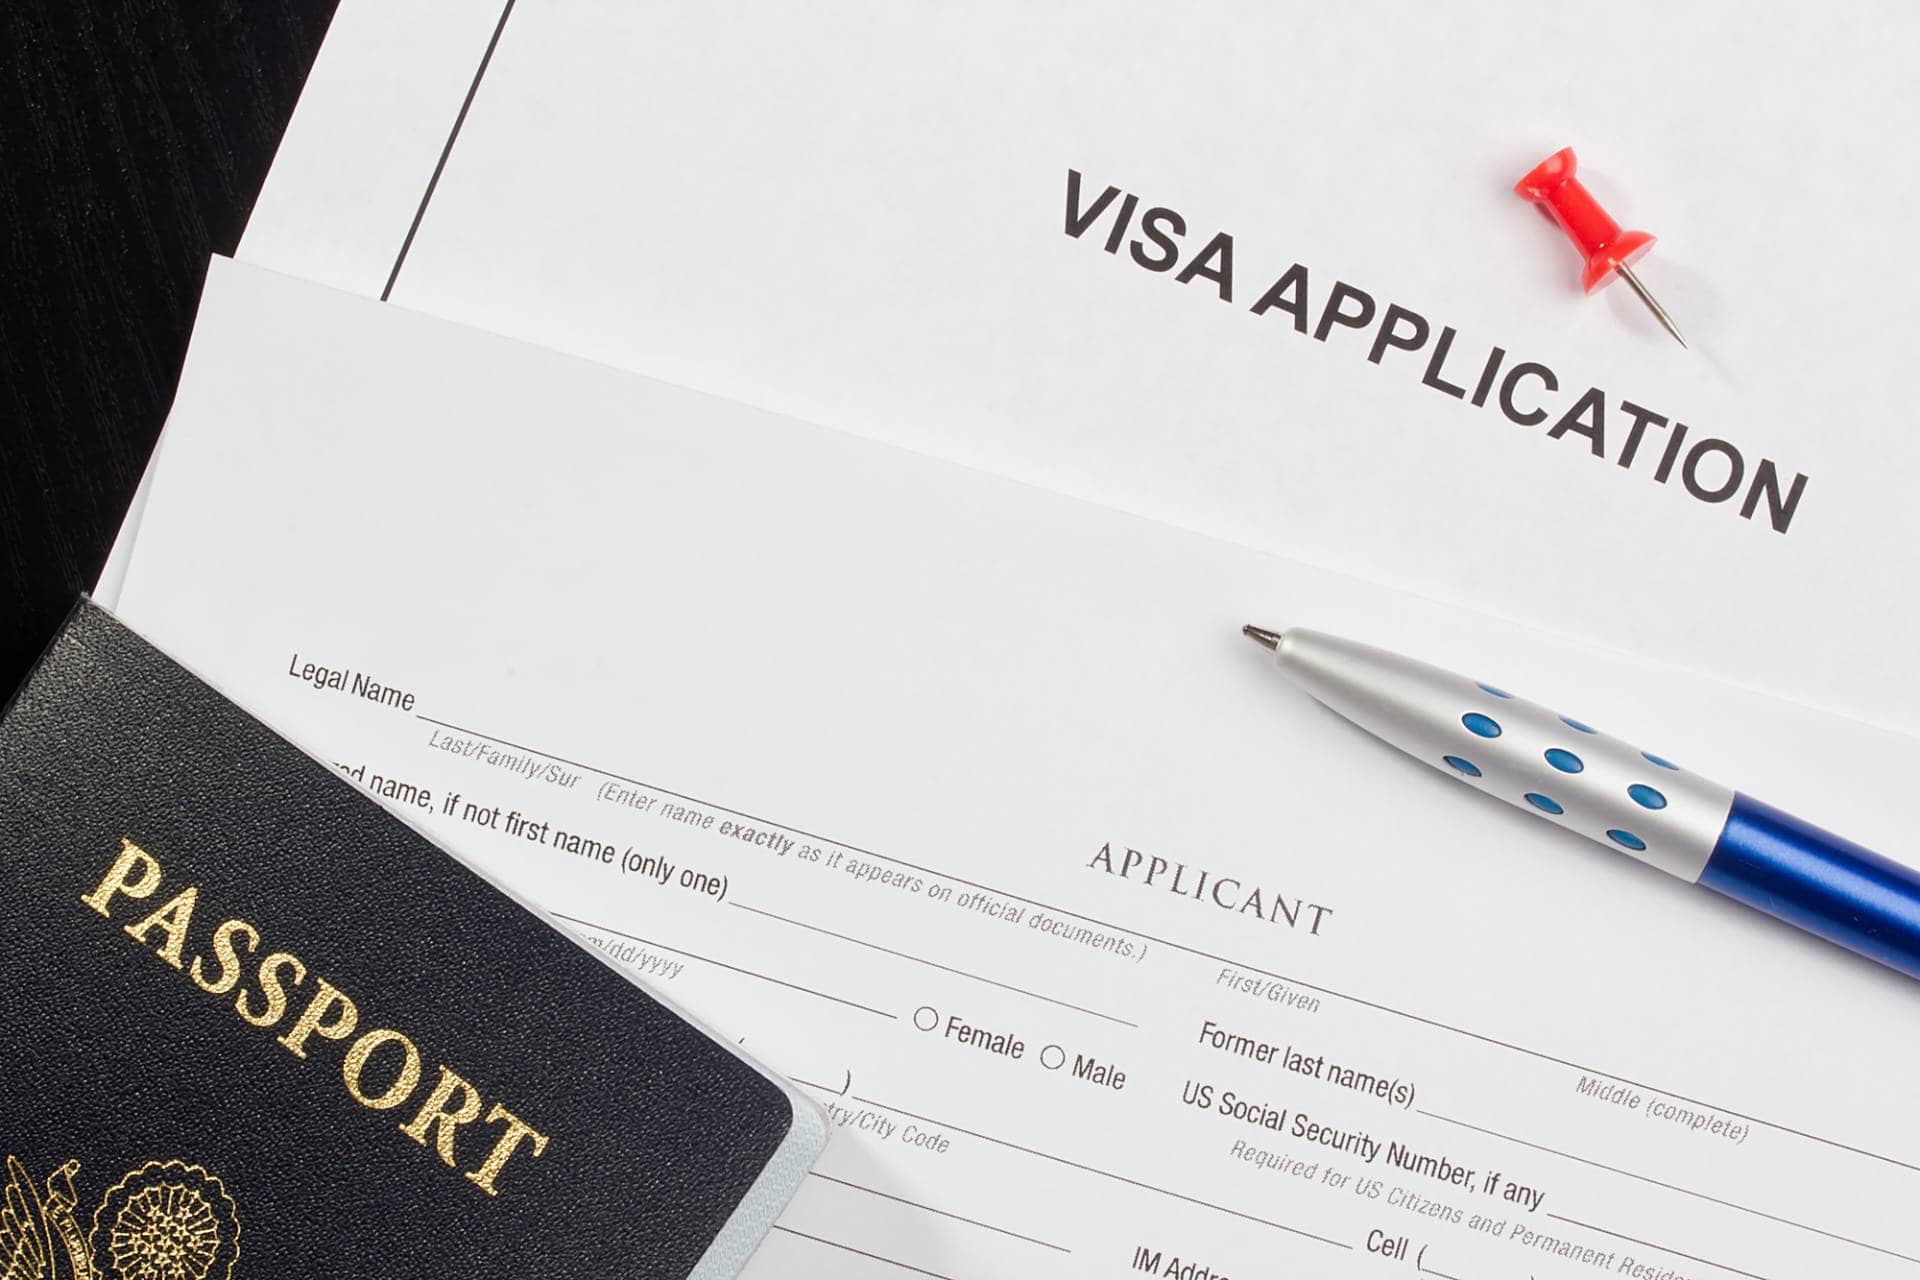 What countries require visas and can I arrange for one when I get there?